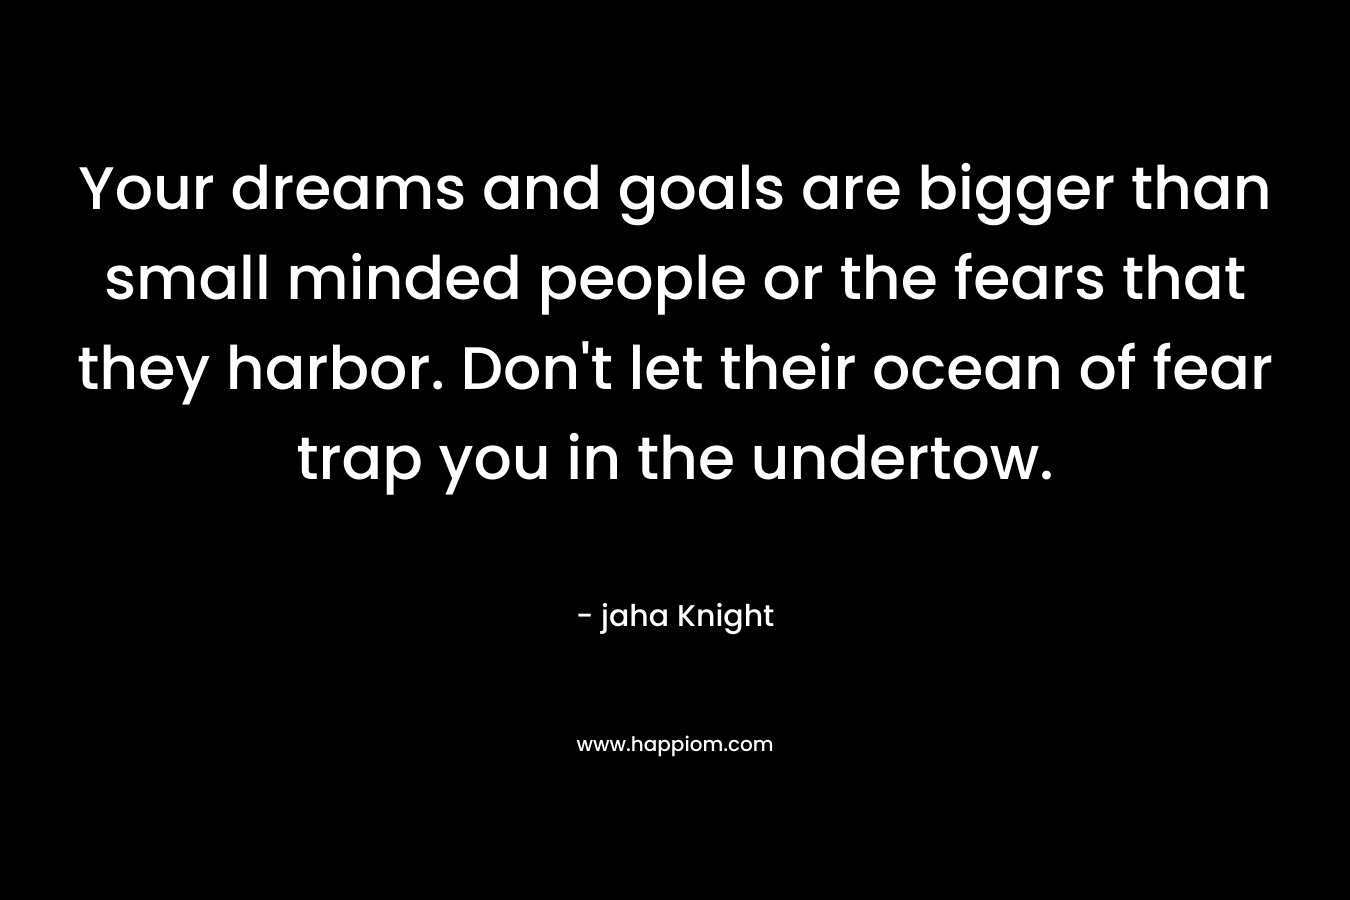 Your dreams and goals are bigger than small minded people or the fears that they harbor. Don’t let their ocean of fear trap you in the undertow. – jaha Knight